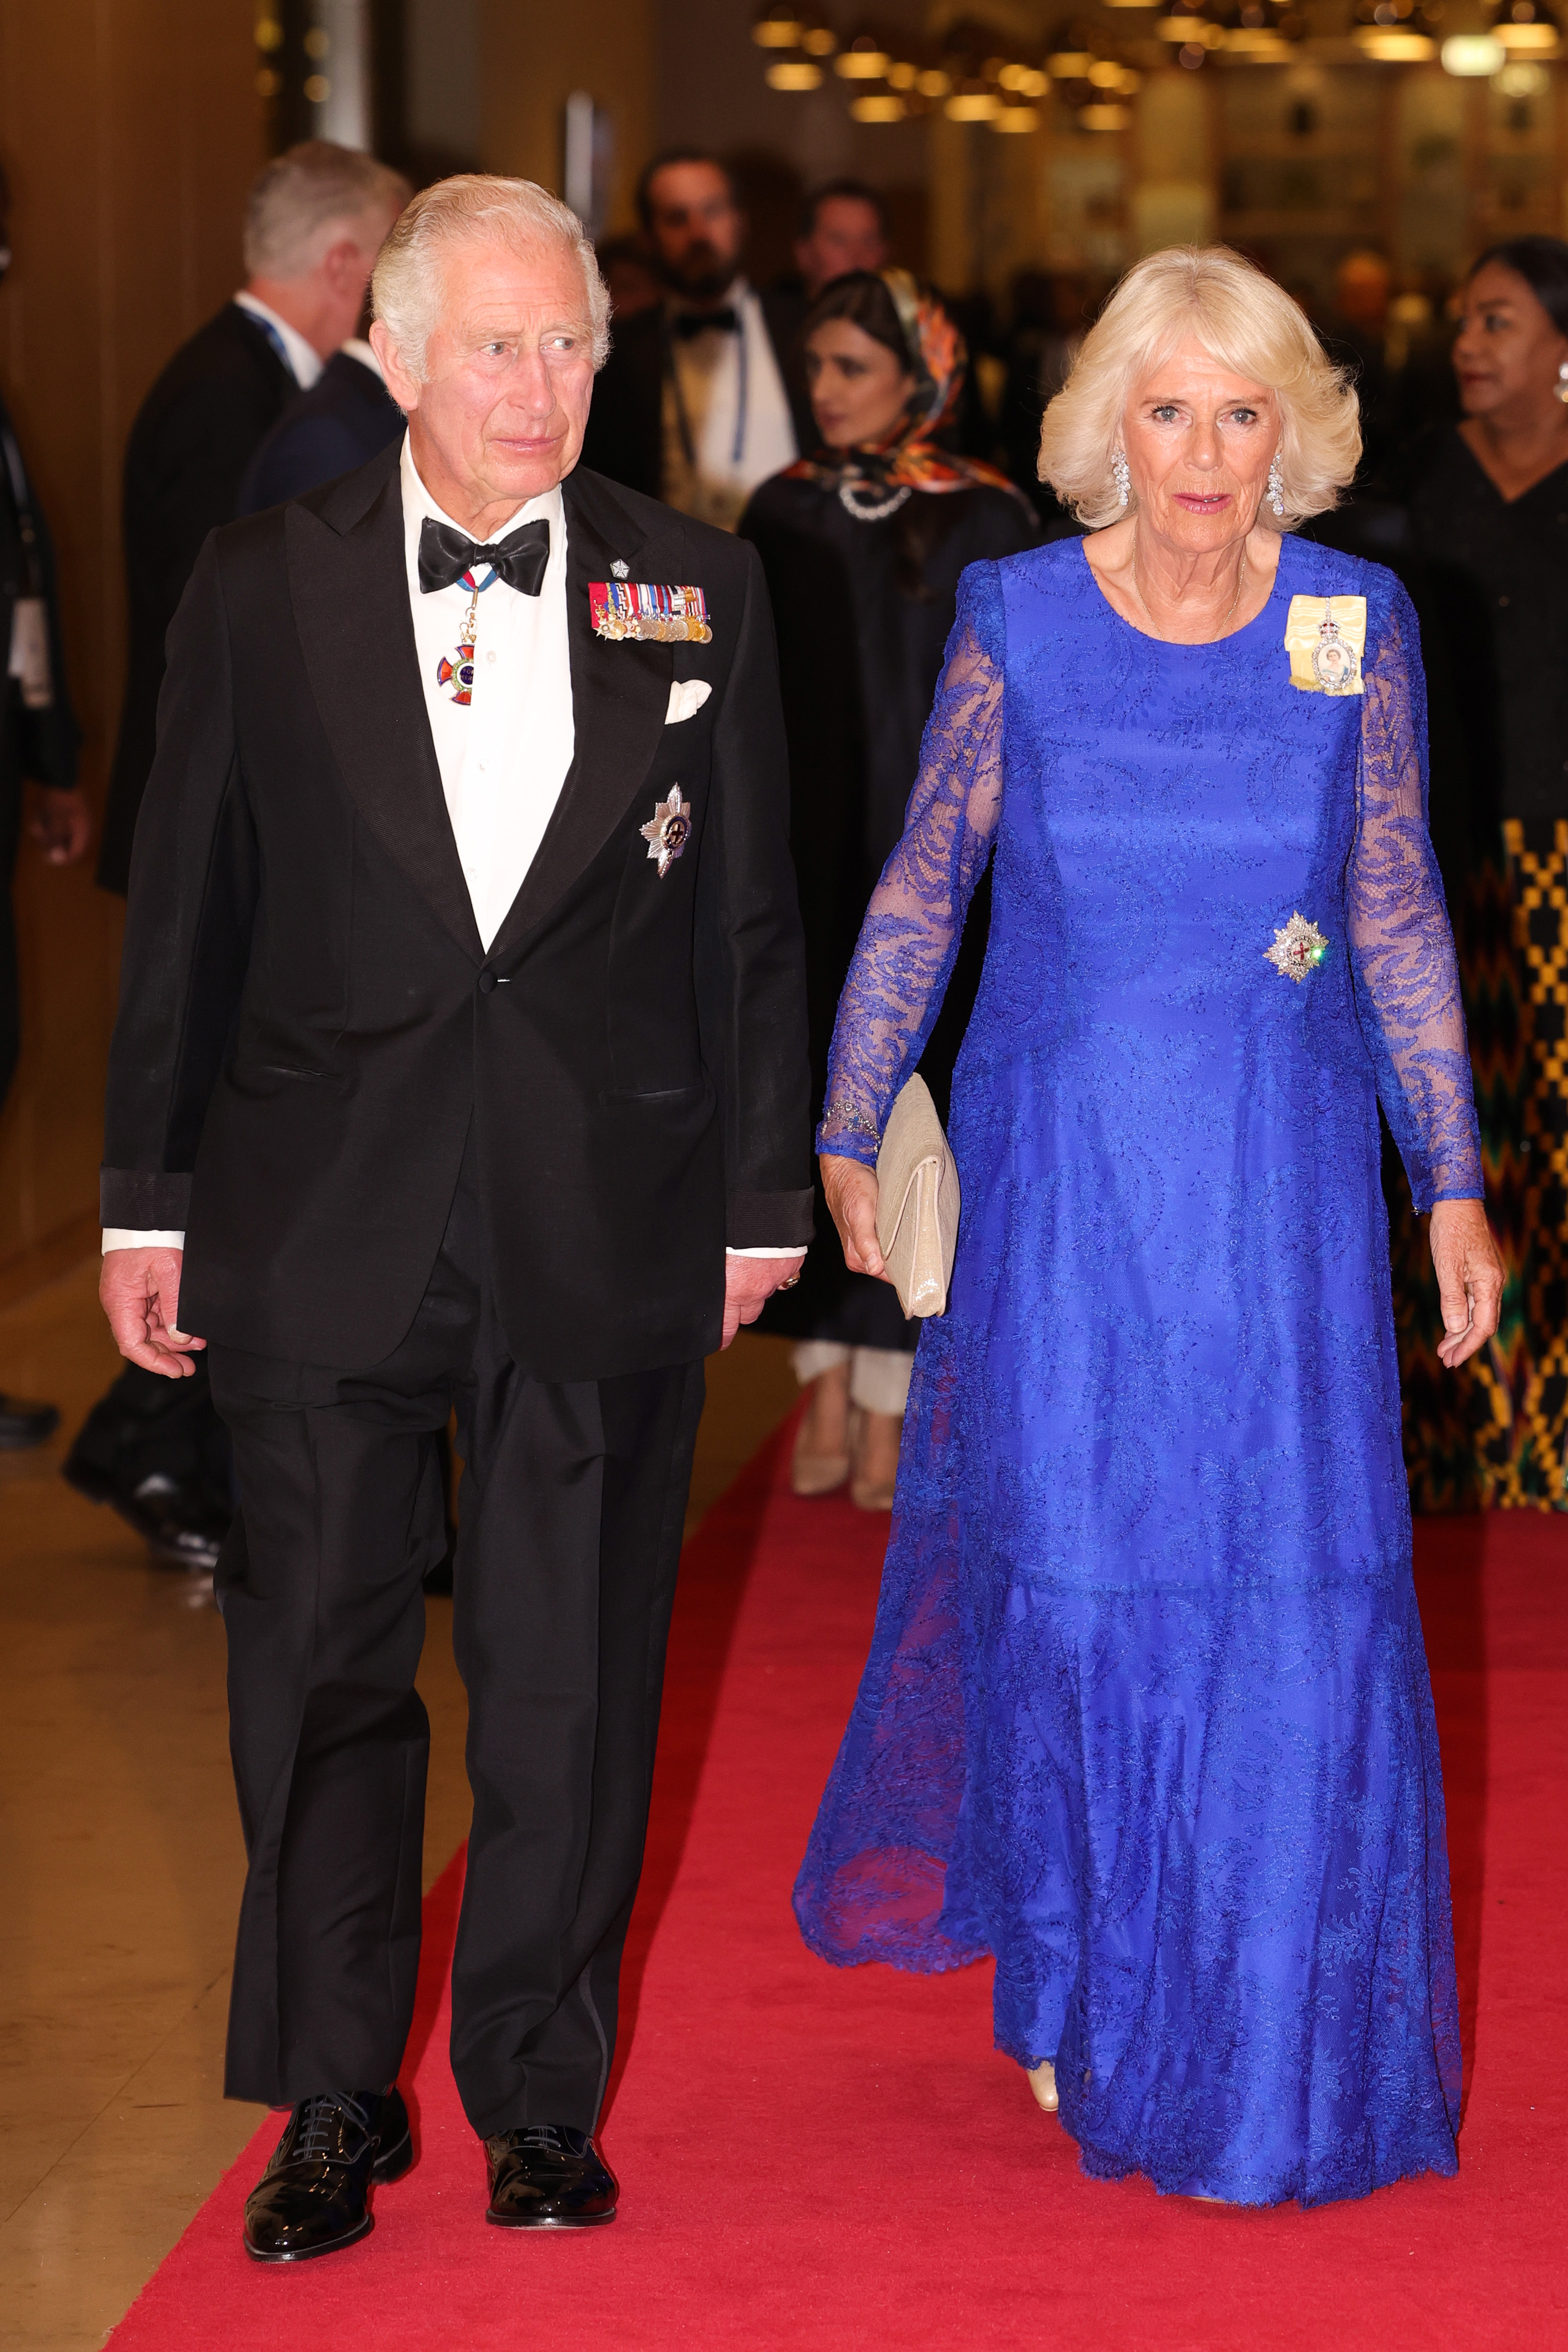 King Charles and Queen Camilla attend a dinner event at the Marriott Hotel on June 24, 2022 in Kigali, Rwanda | Source: Getty Images